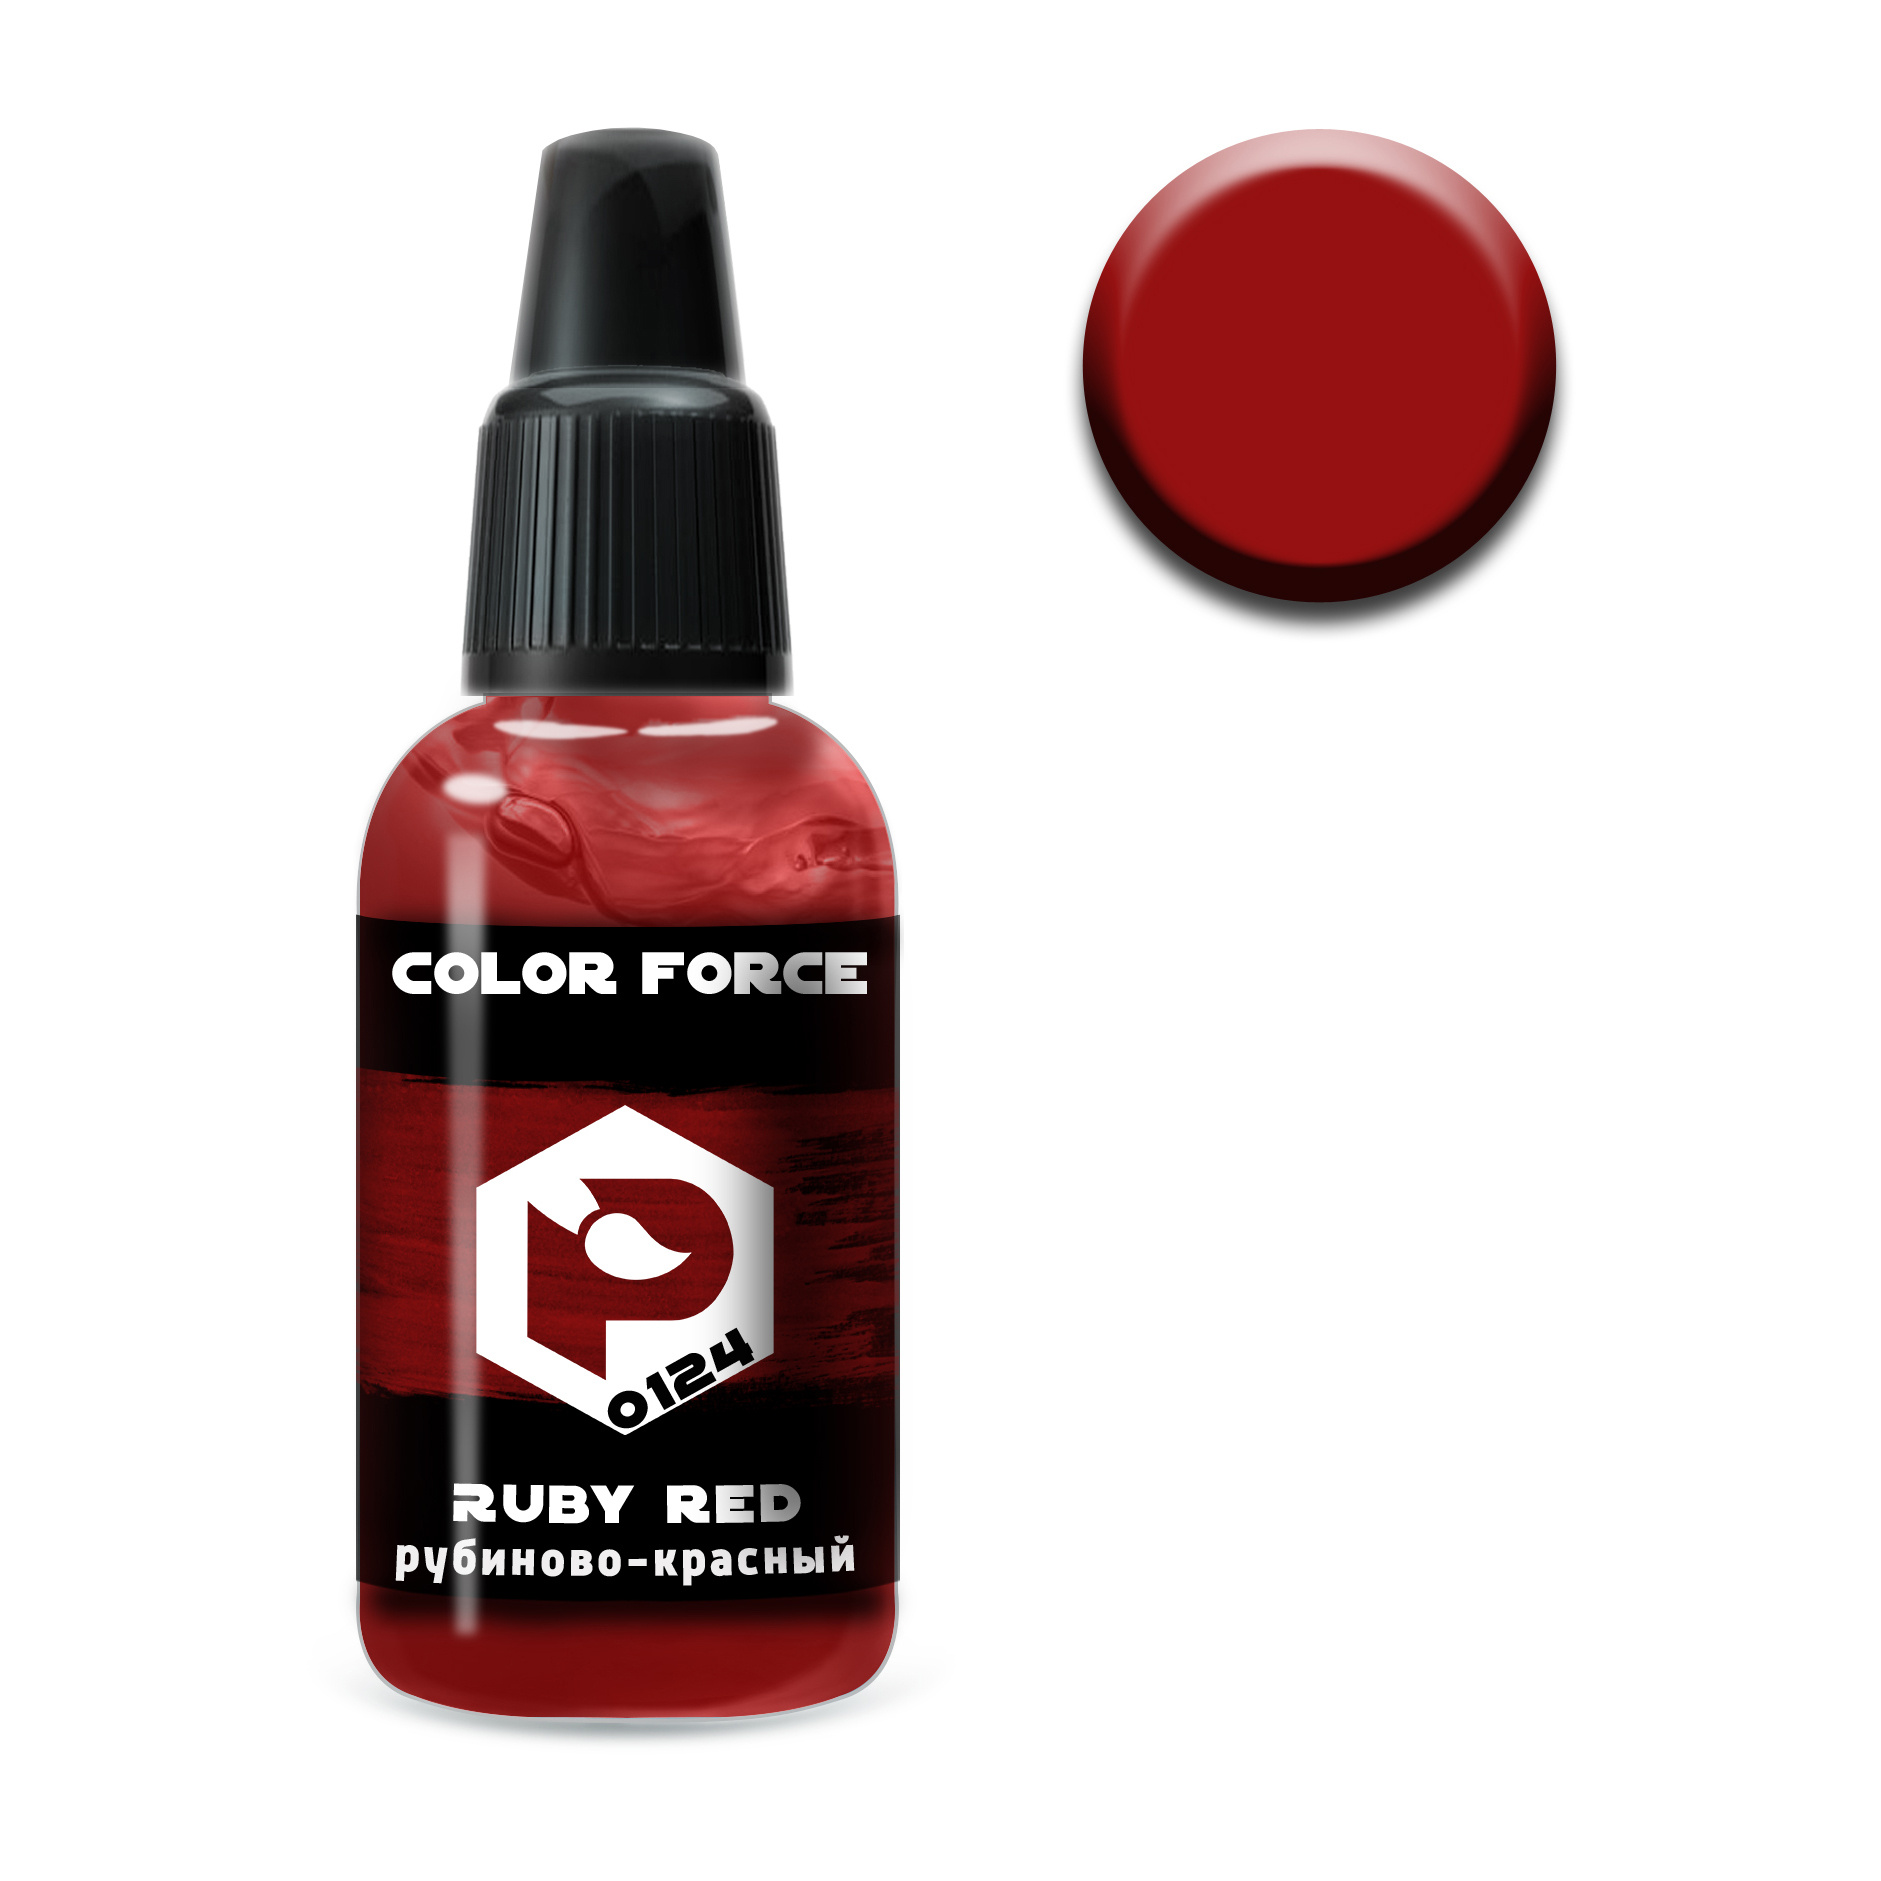 art.0124 Pacific88 airbrush Paint Ruby red (Ruby red)